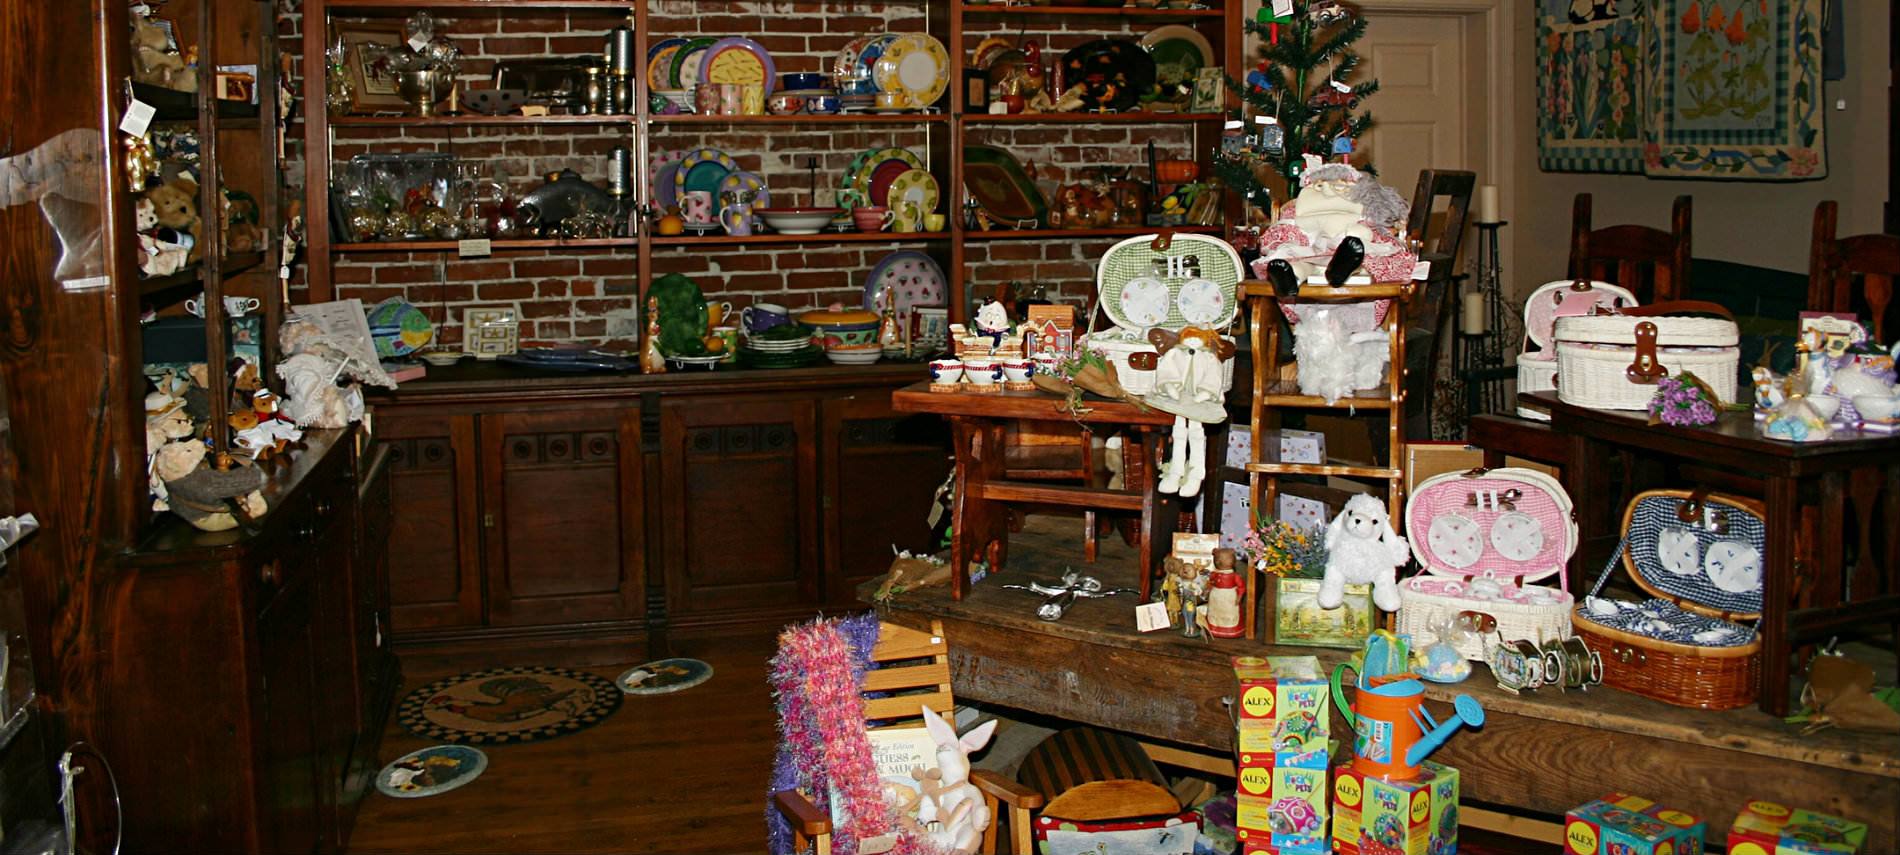 Room with wooden shelves, cabinets and tables with a variety of merchandise of all types.